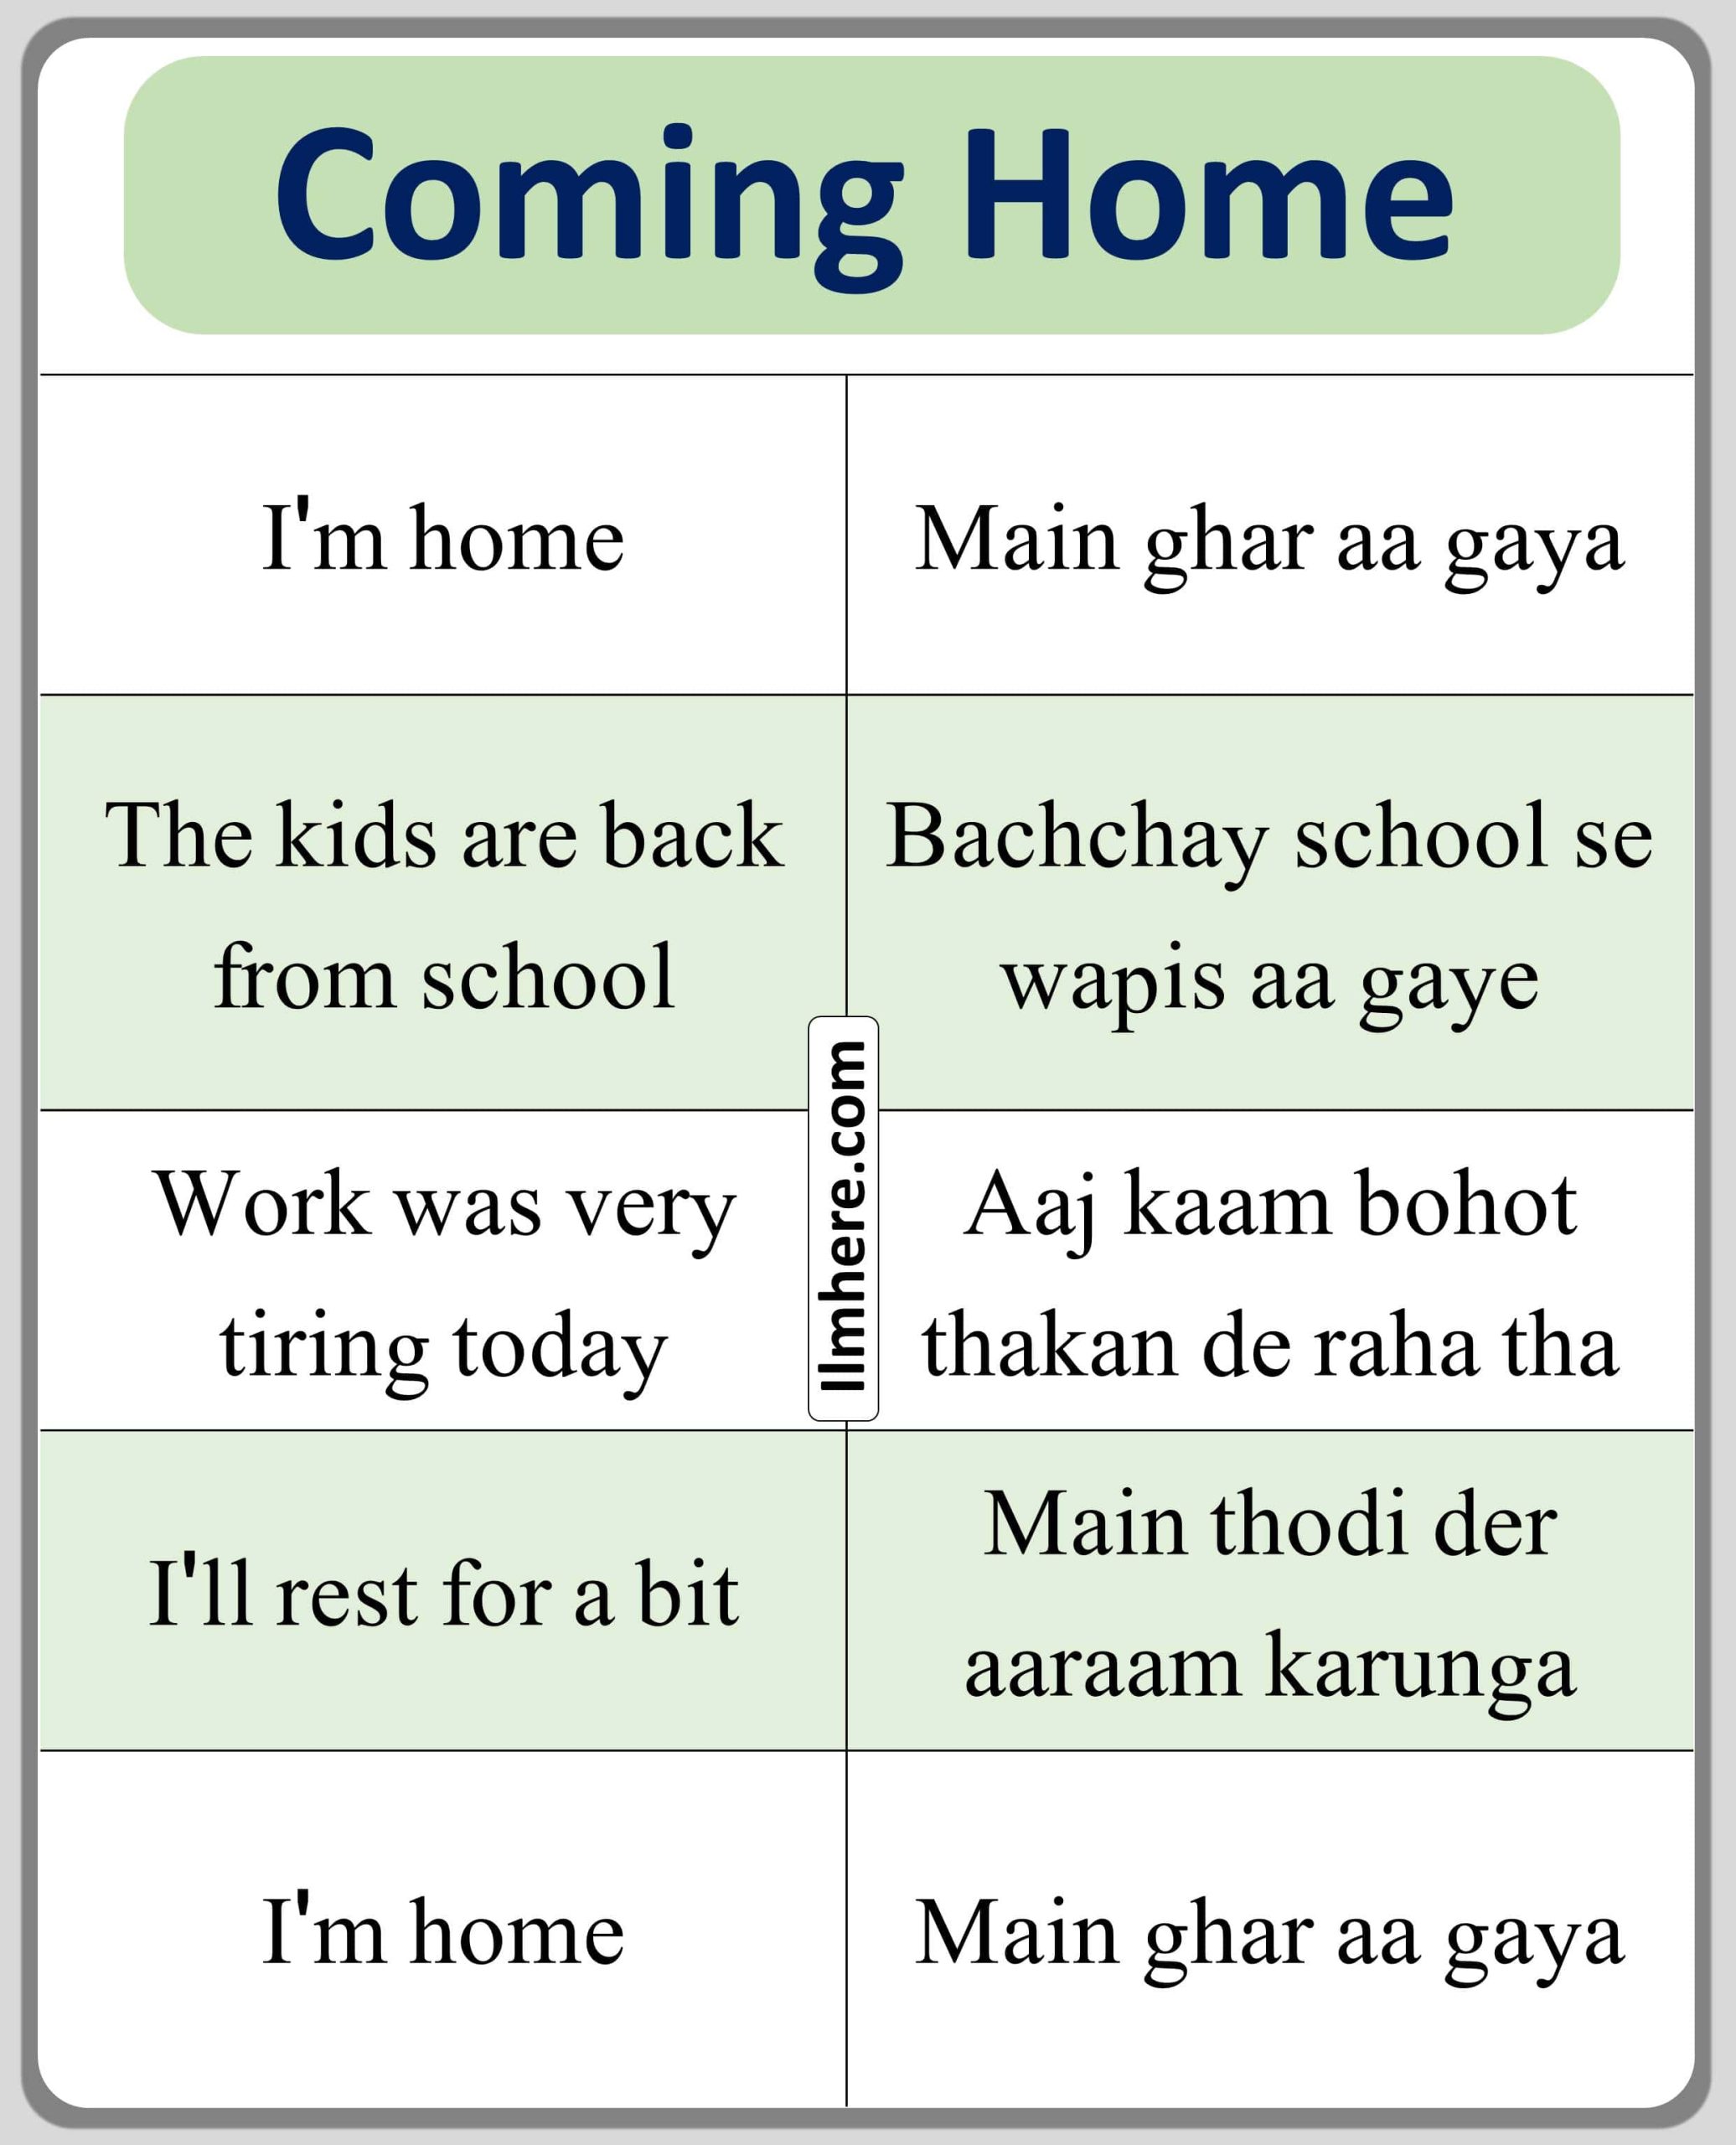 Coming Home Urdu to English Sentences for Household Chore